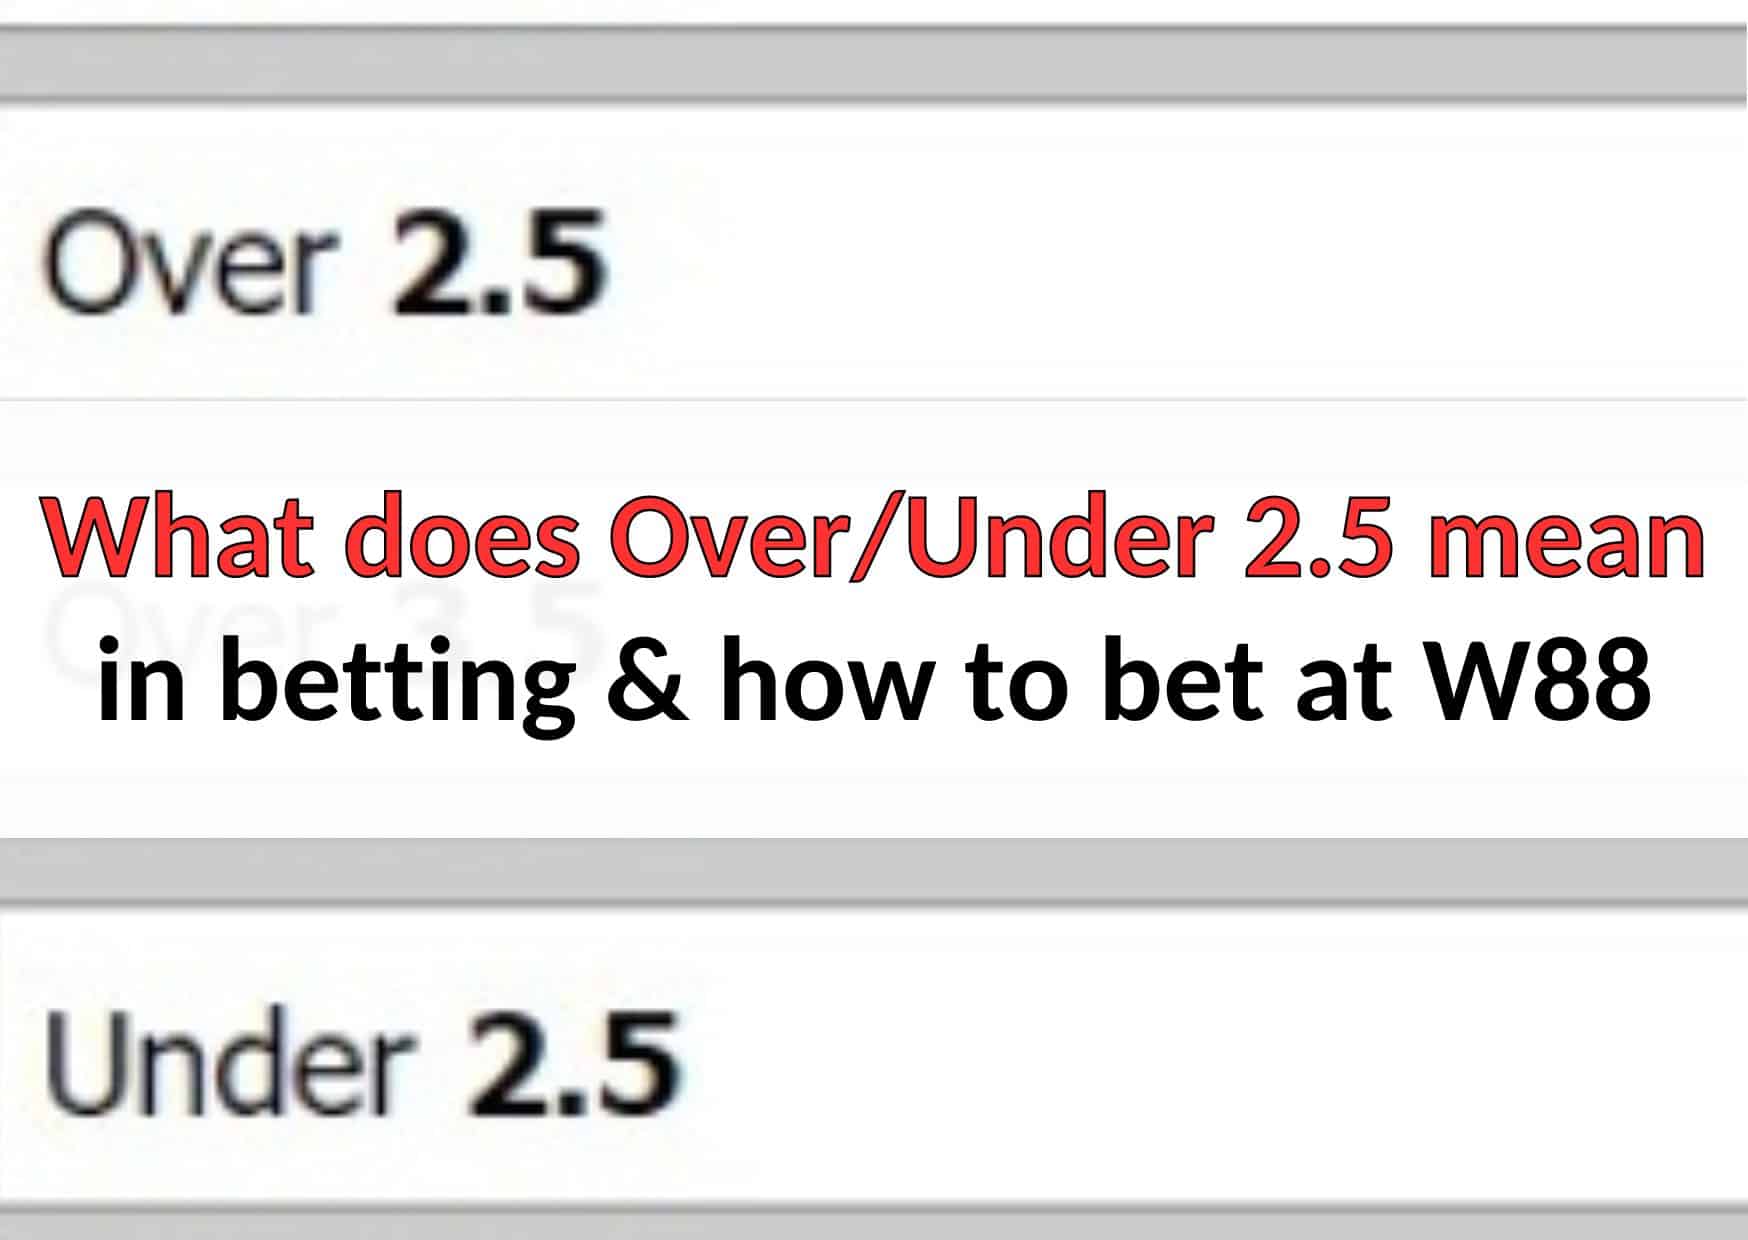 w88malayu over under 2.5 in betting meaning